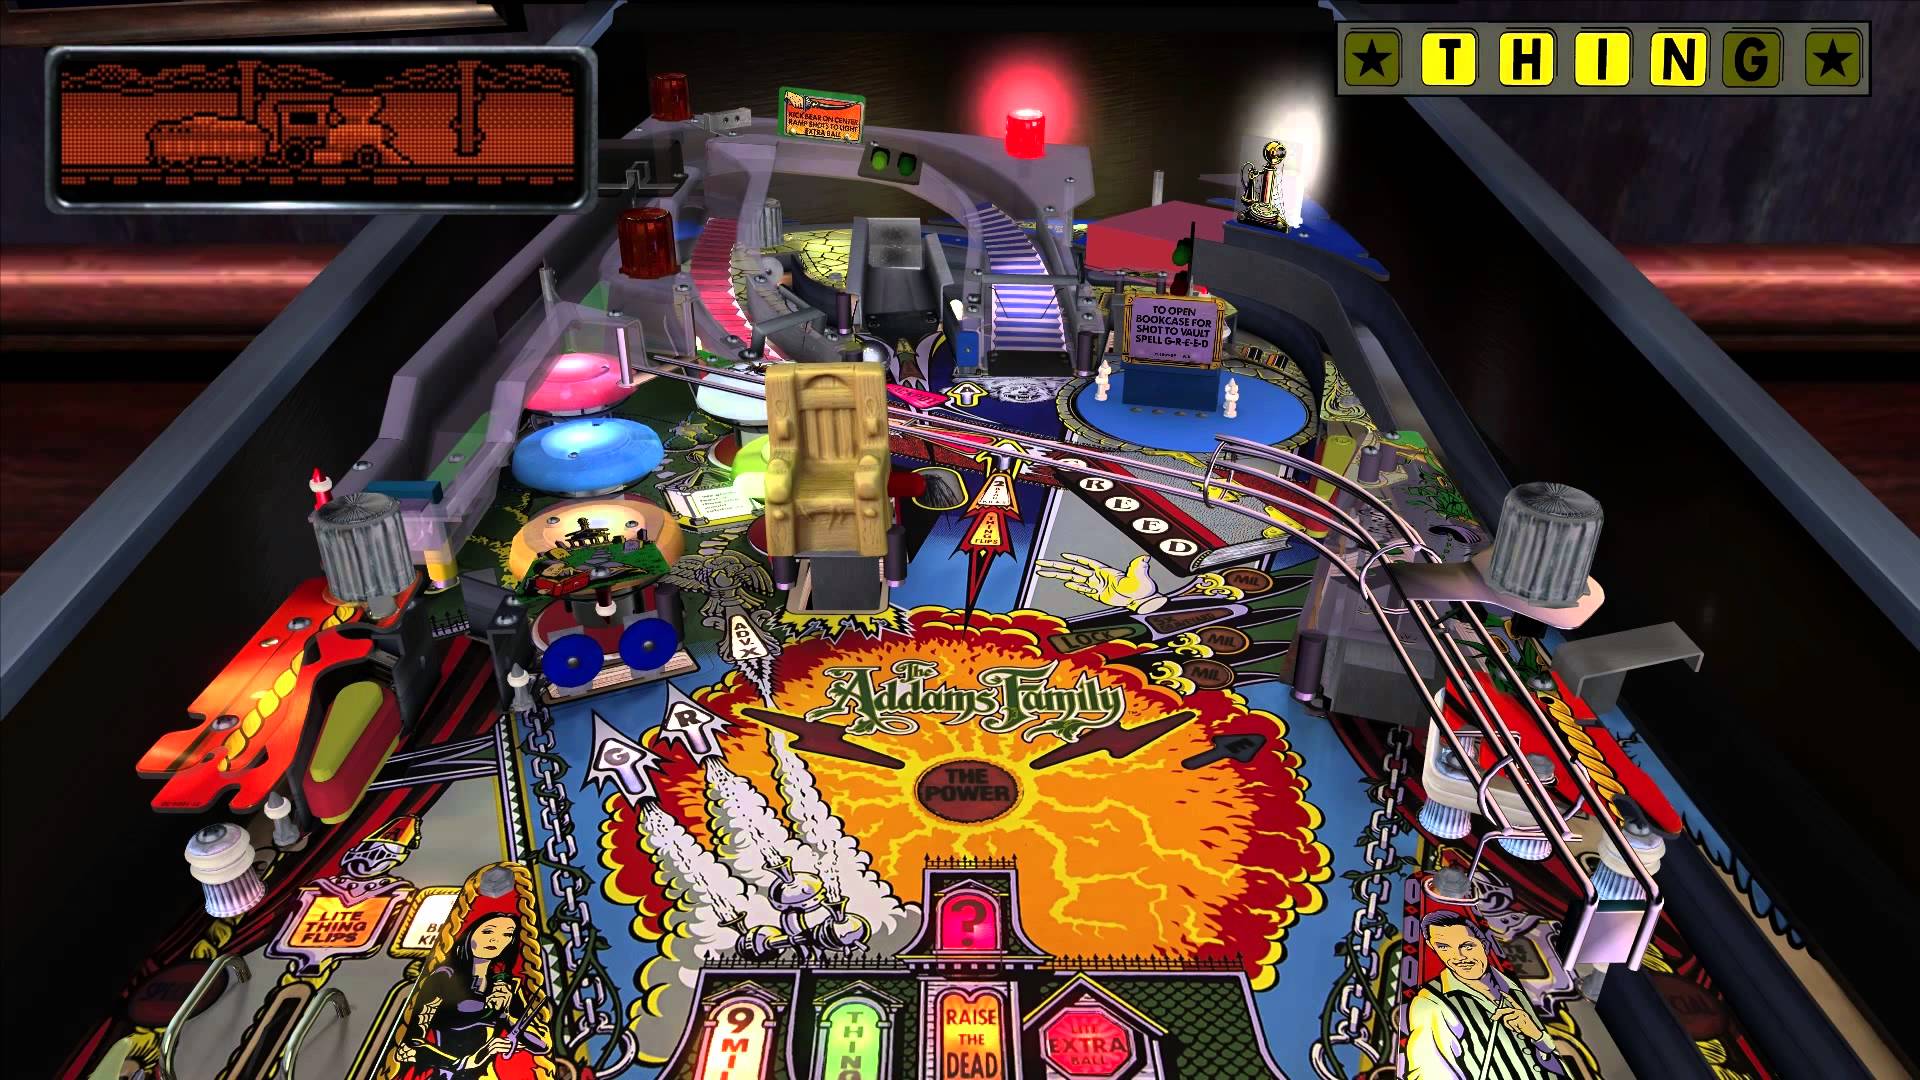 Let’s Play The Addams Family (PC) Pinball Arcade – First 10 Minutes